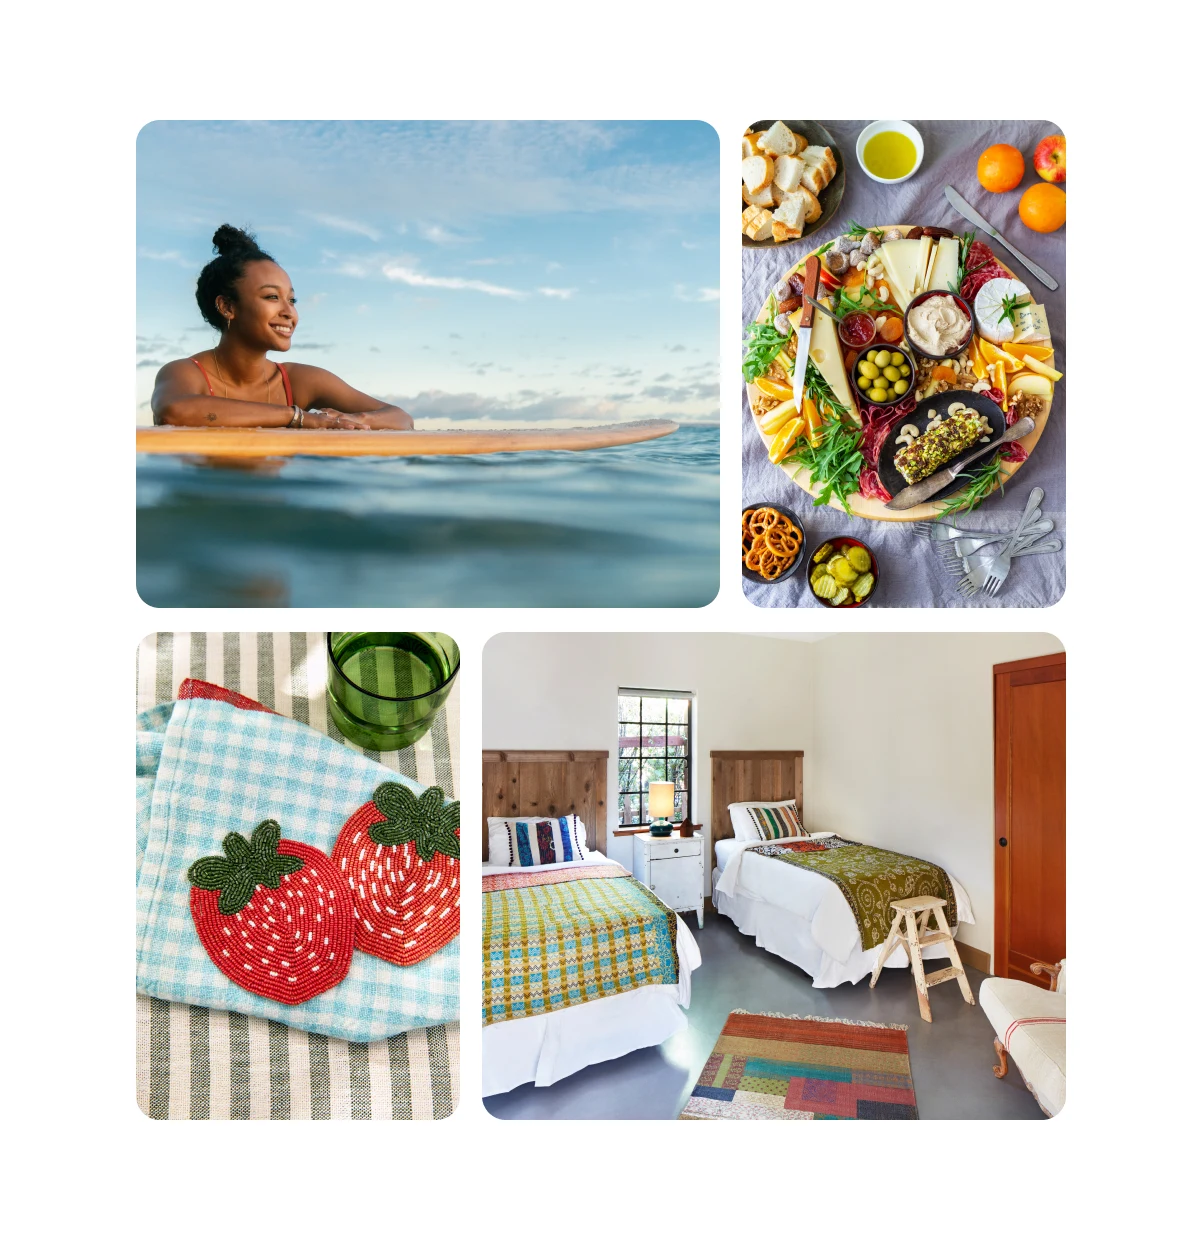 Grid of four images, including aesthetic summer photo ideas, party food platters, summer arts and crafts projects, shared bedroom ideas